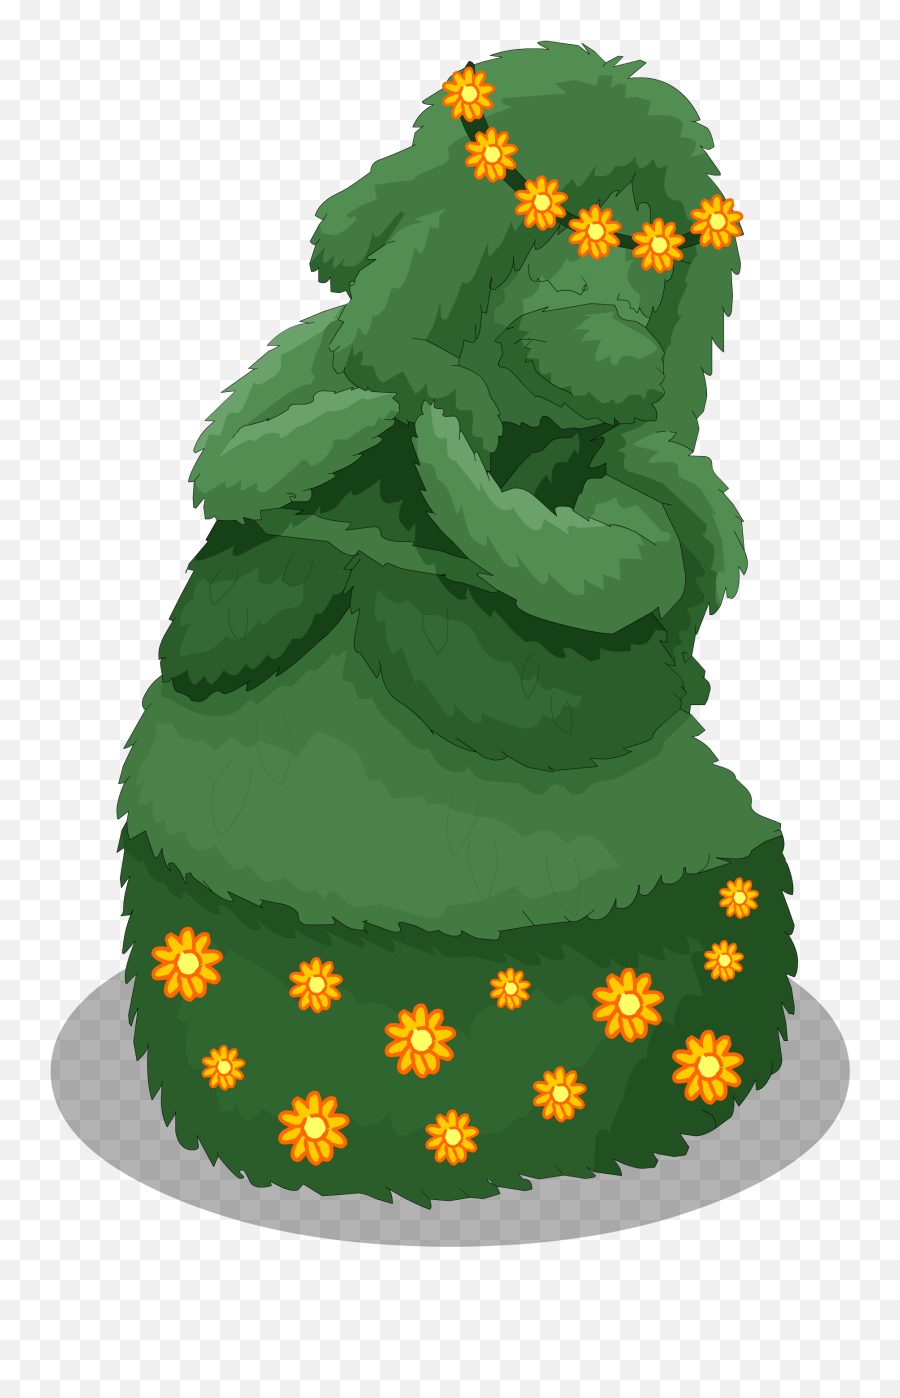 Download Hd Maiden Shrubbery Sprite 001 - Illustration Png,Shrubbery Png